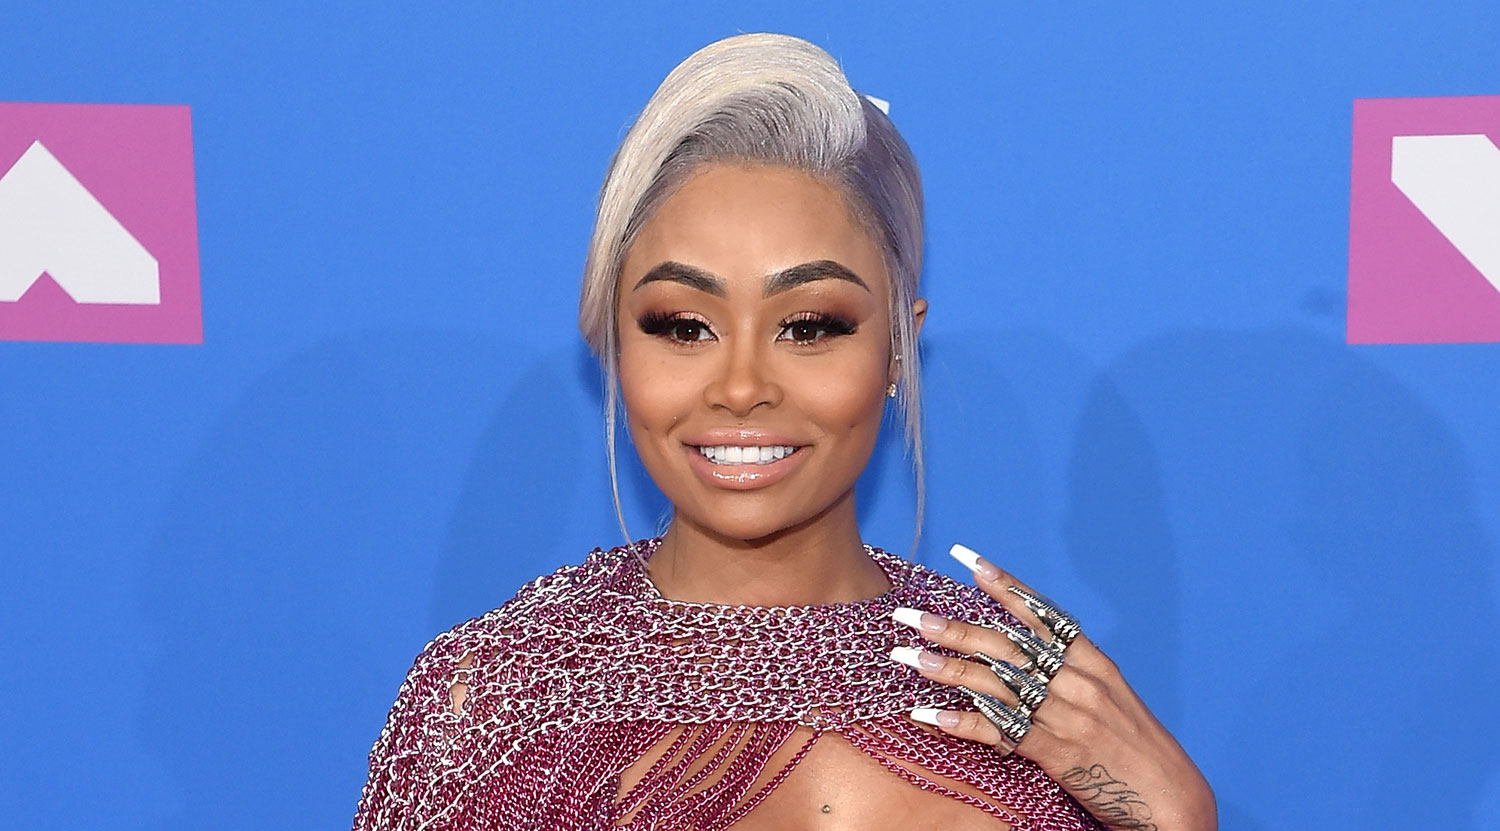 Blac Chyna Partners With Skin Lightening Cream Company to Sell $250 Jars